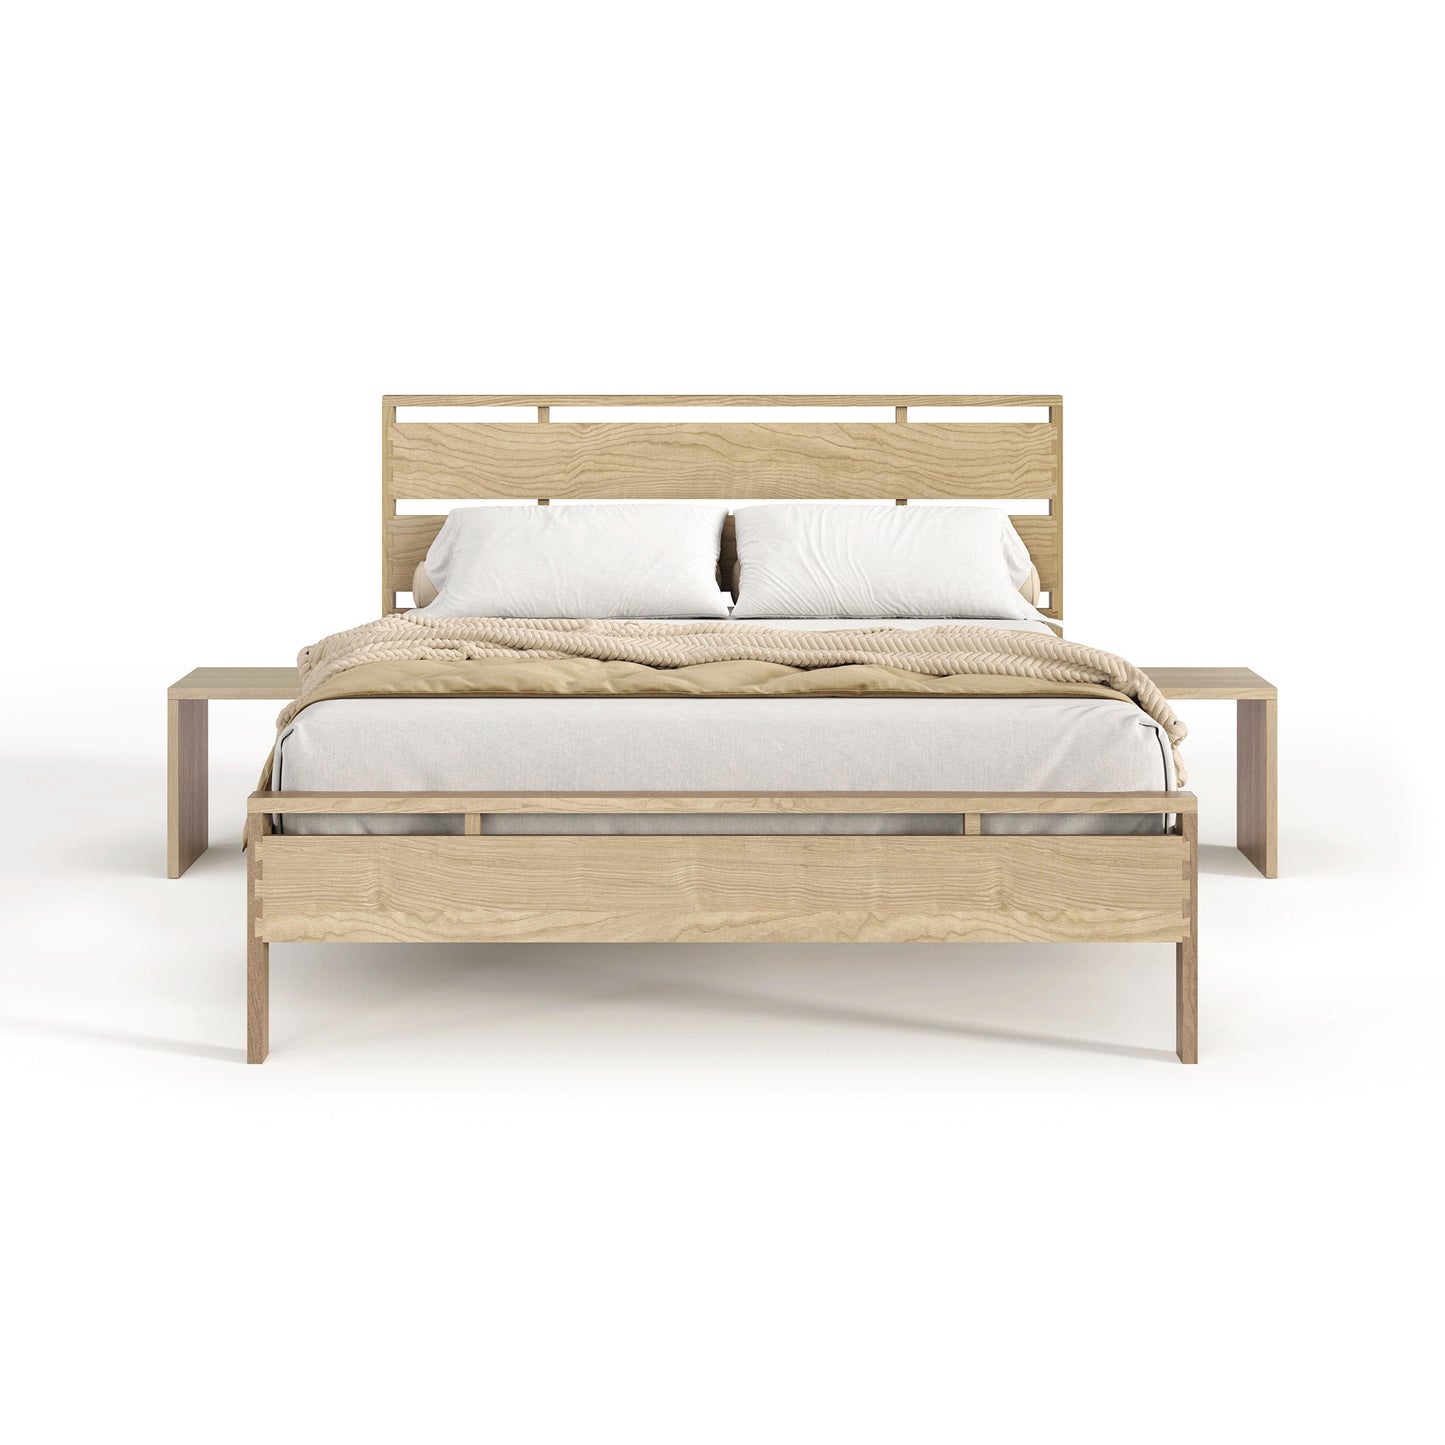 A modern Oslo Platform Bed from Copeland Furniture, constructed of solid oak hardwood with a headboard, featuring white bedding and a beige blanket, set against a plain white background.